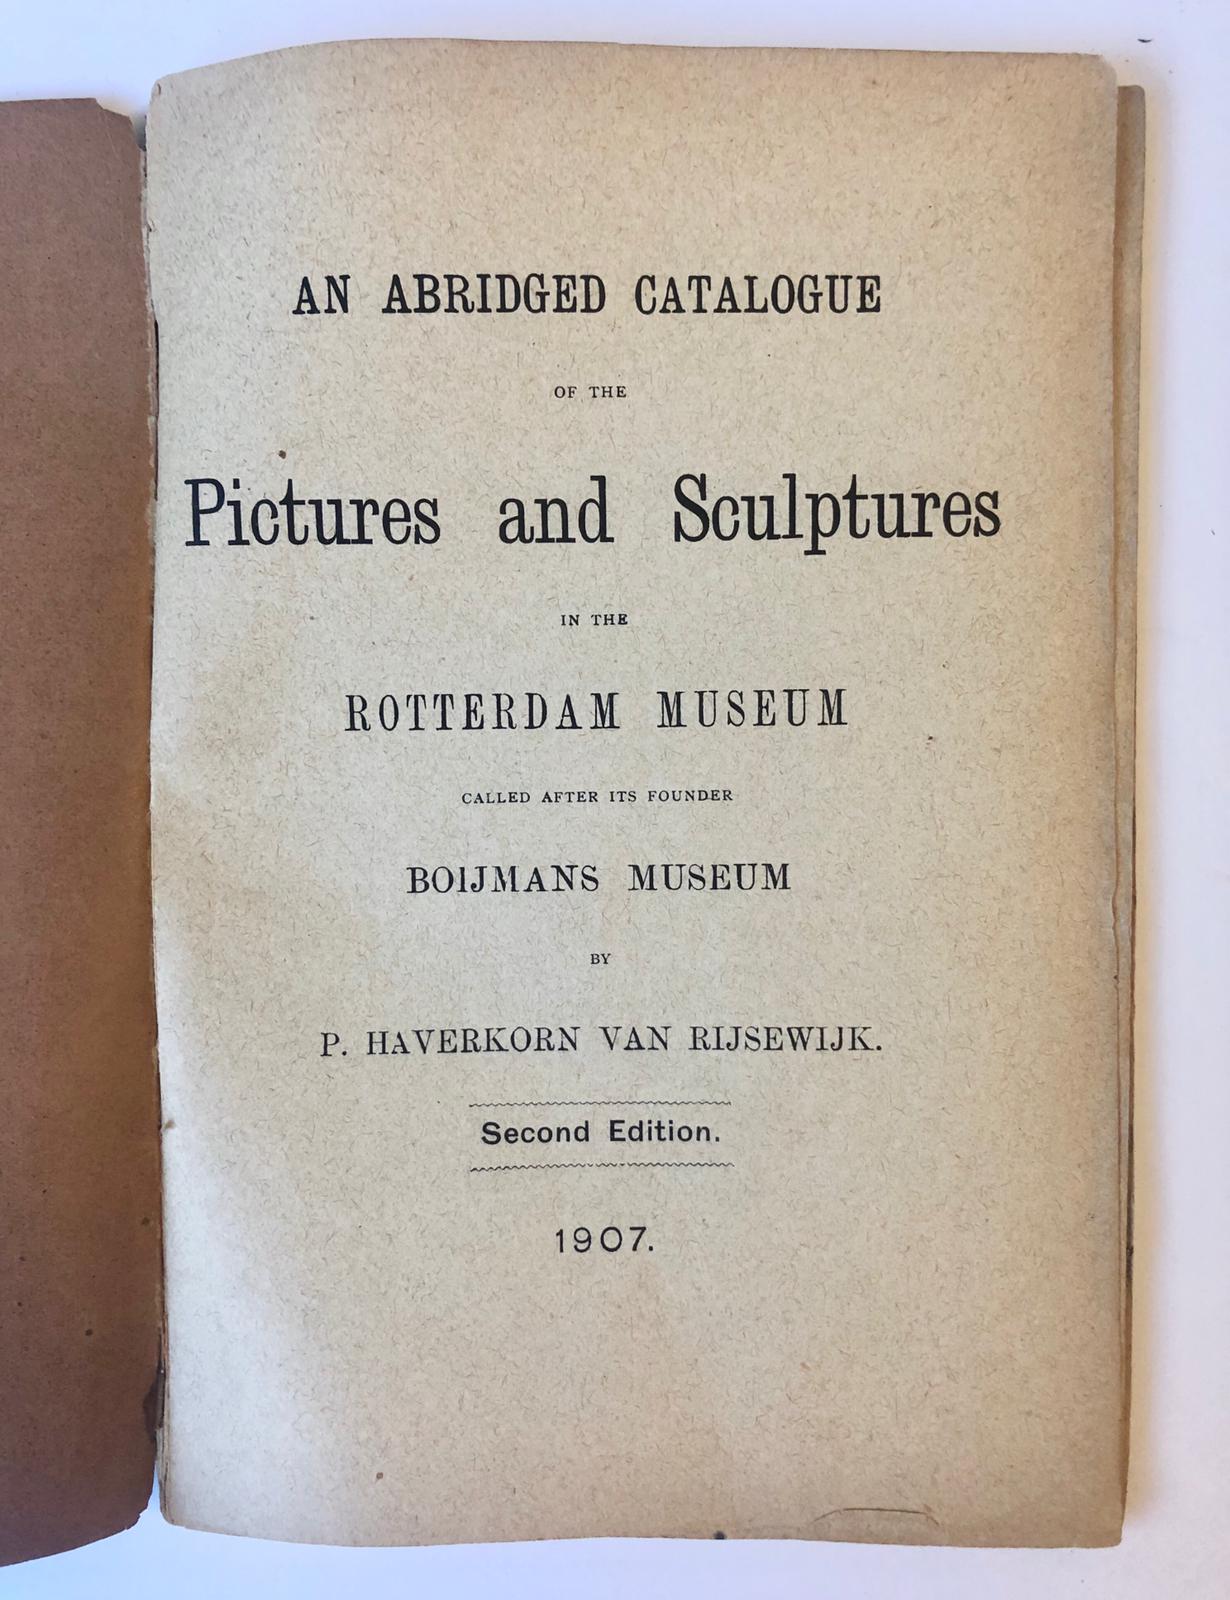 [Rotterdam, Museum Catalogue 1907] An abridged catalogue of the pictures and sculptures in the Rotterdam Museum called after its founder Boijmans Museum, Second edition, 1907, Electric printing-office Nijgh & Van Ditmar, Rotterdam, 72 pp.